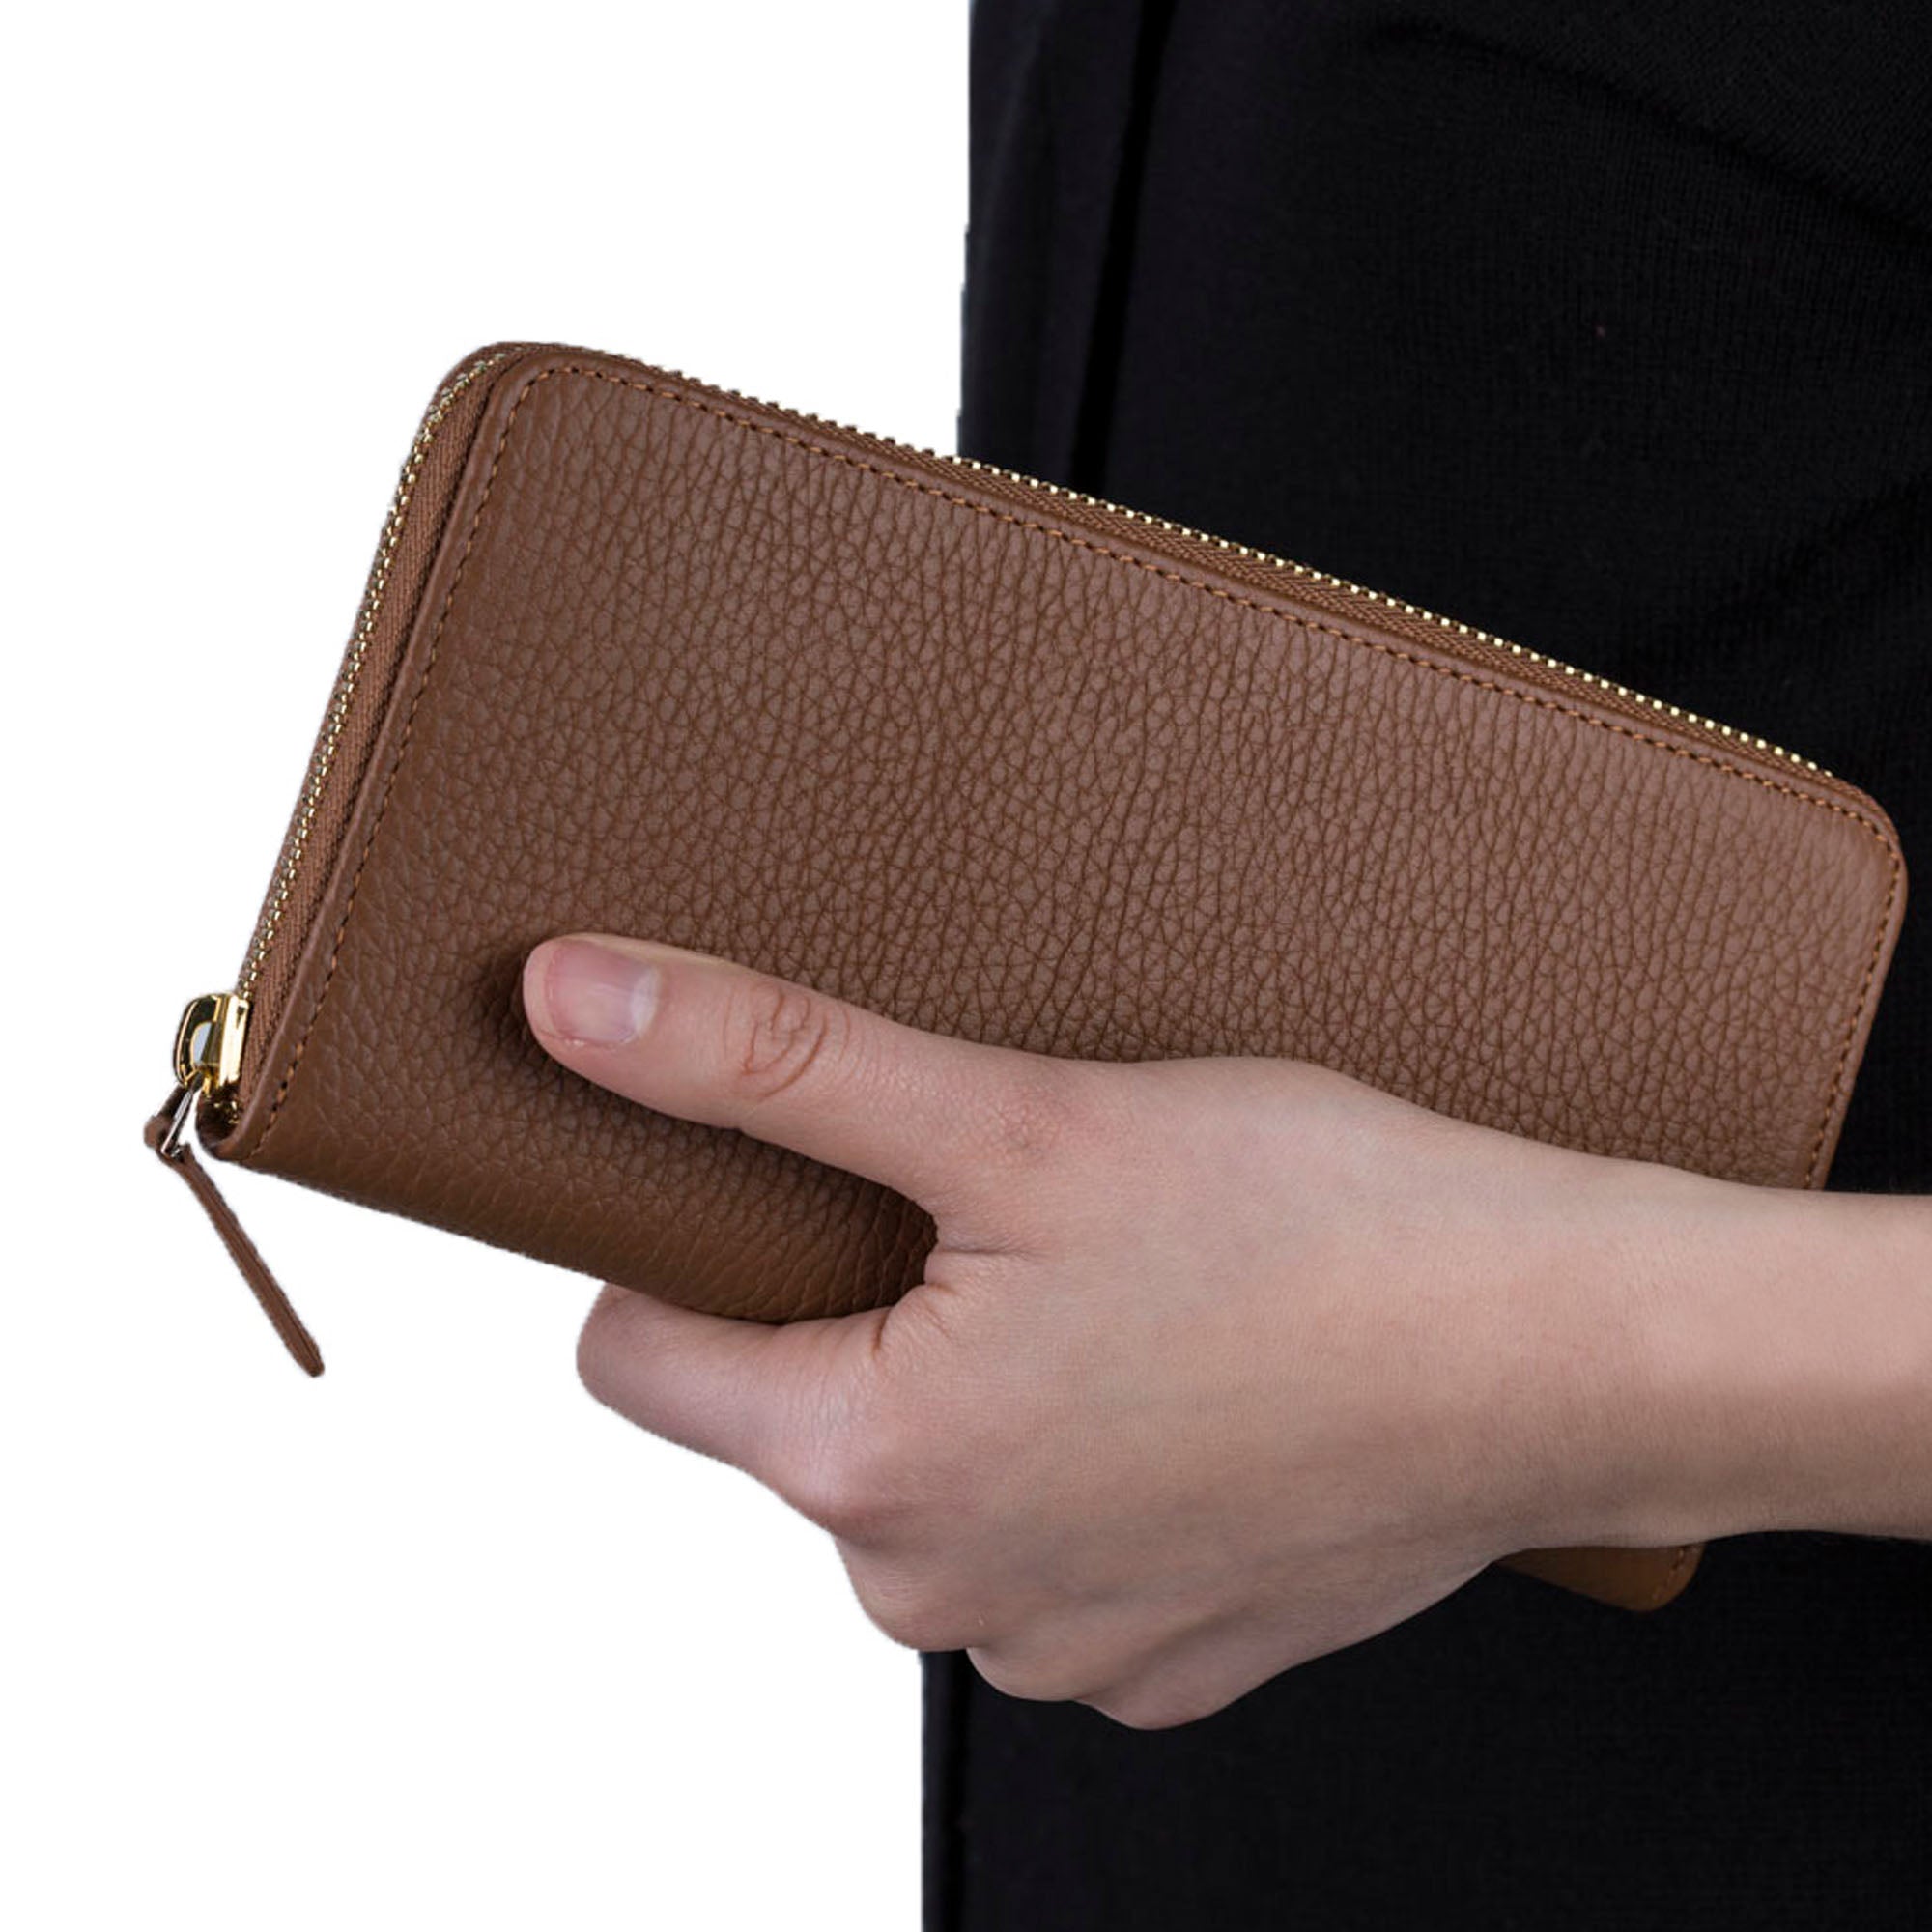 Seville Women's Leather Wallet - TAN - saracleather